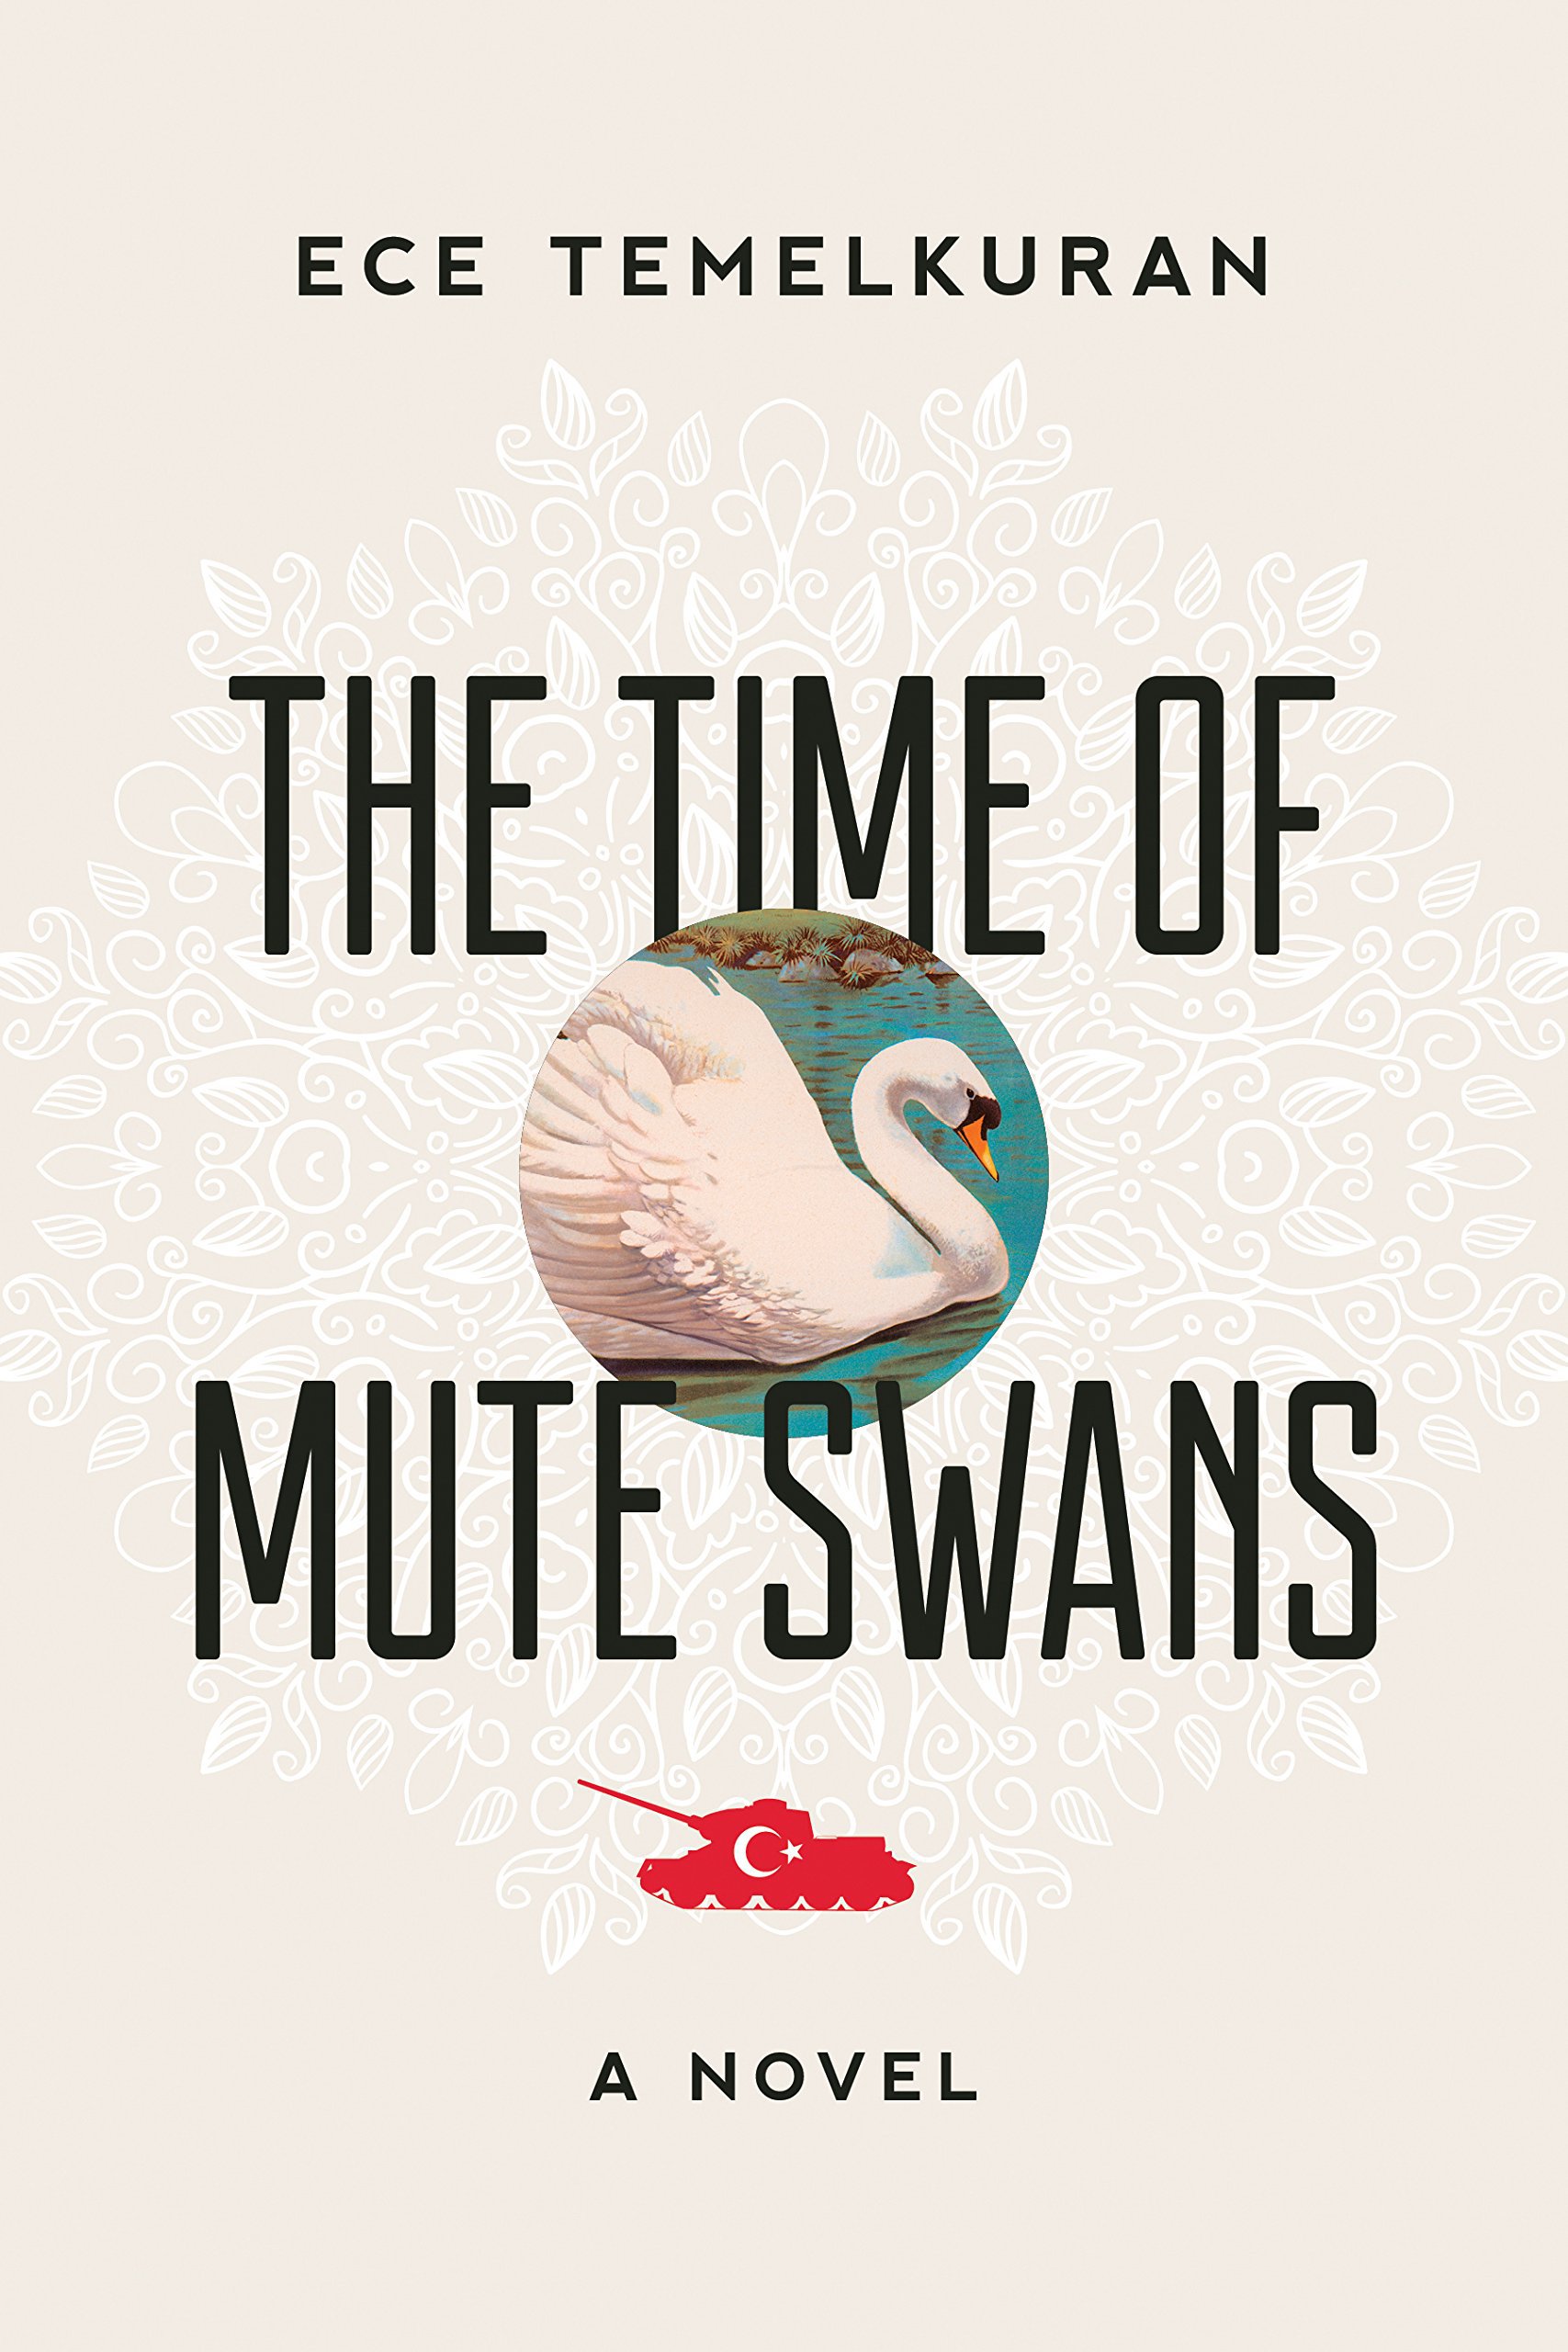 The Time of Mute Swans